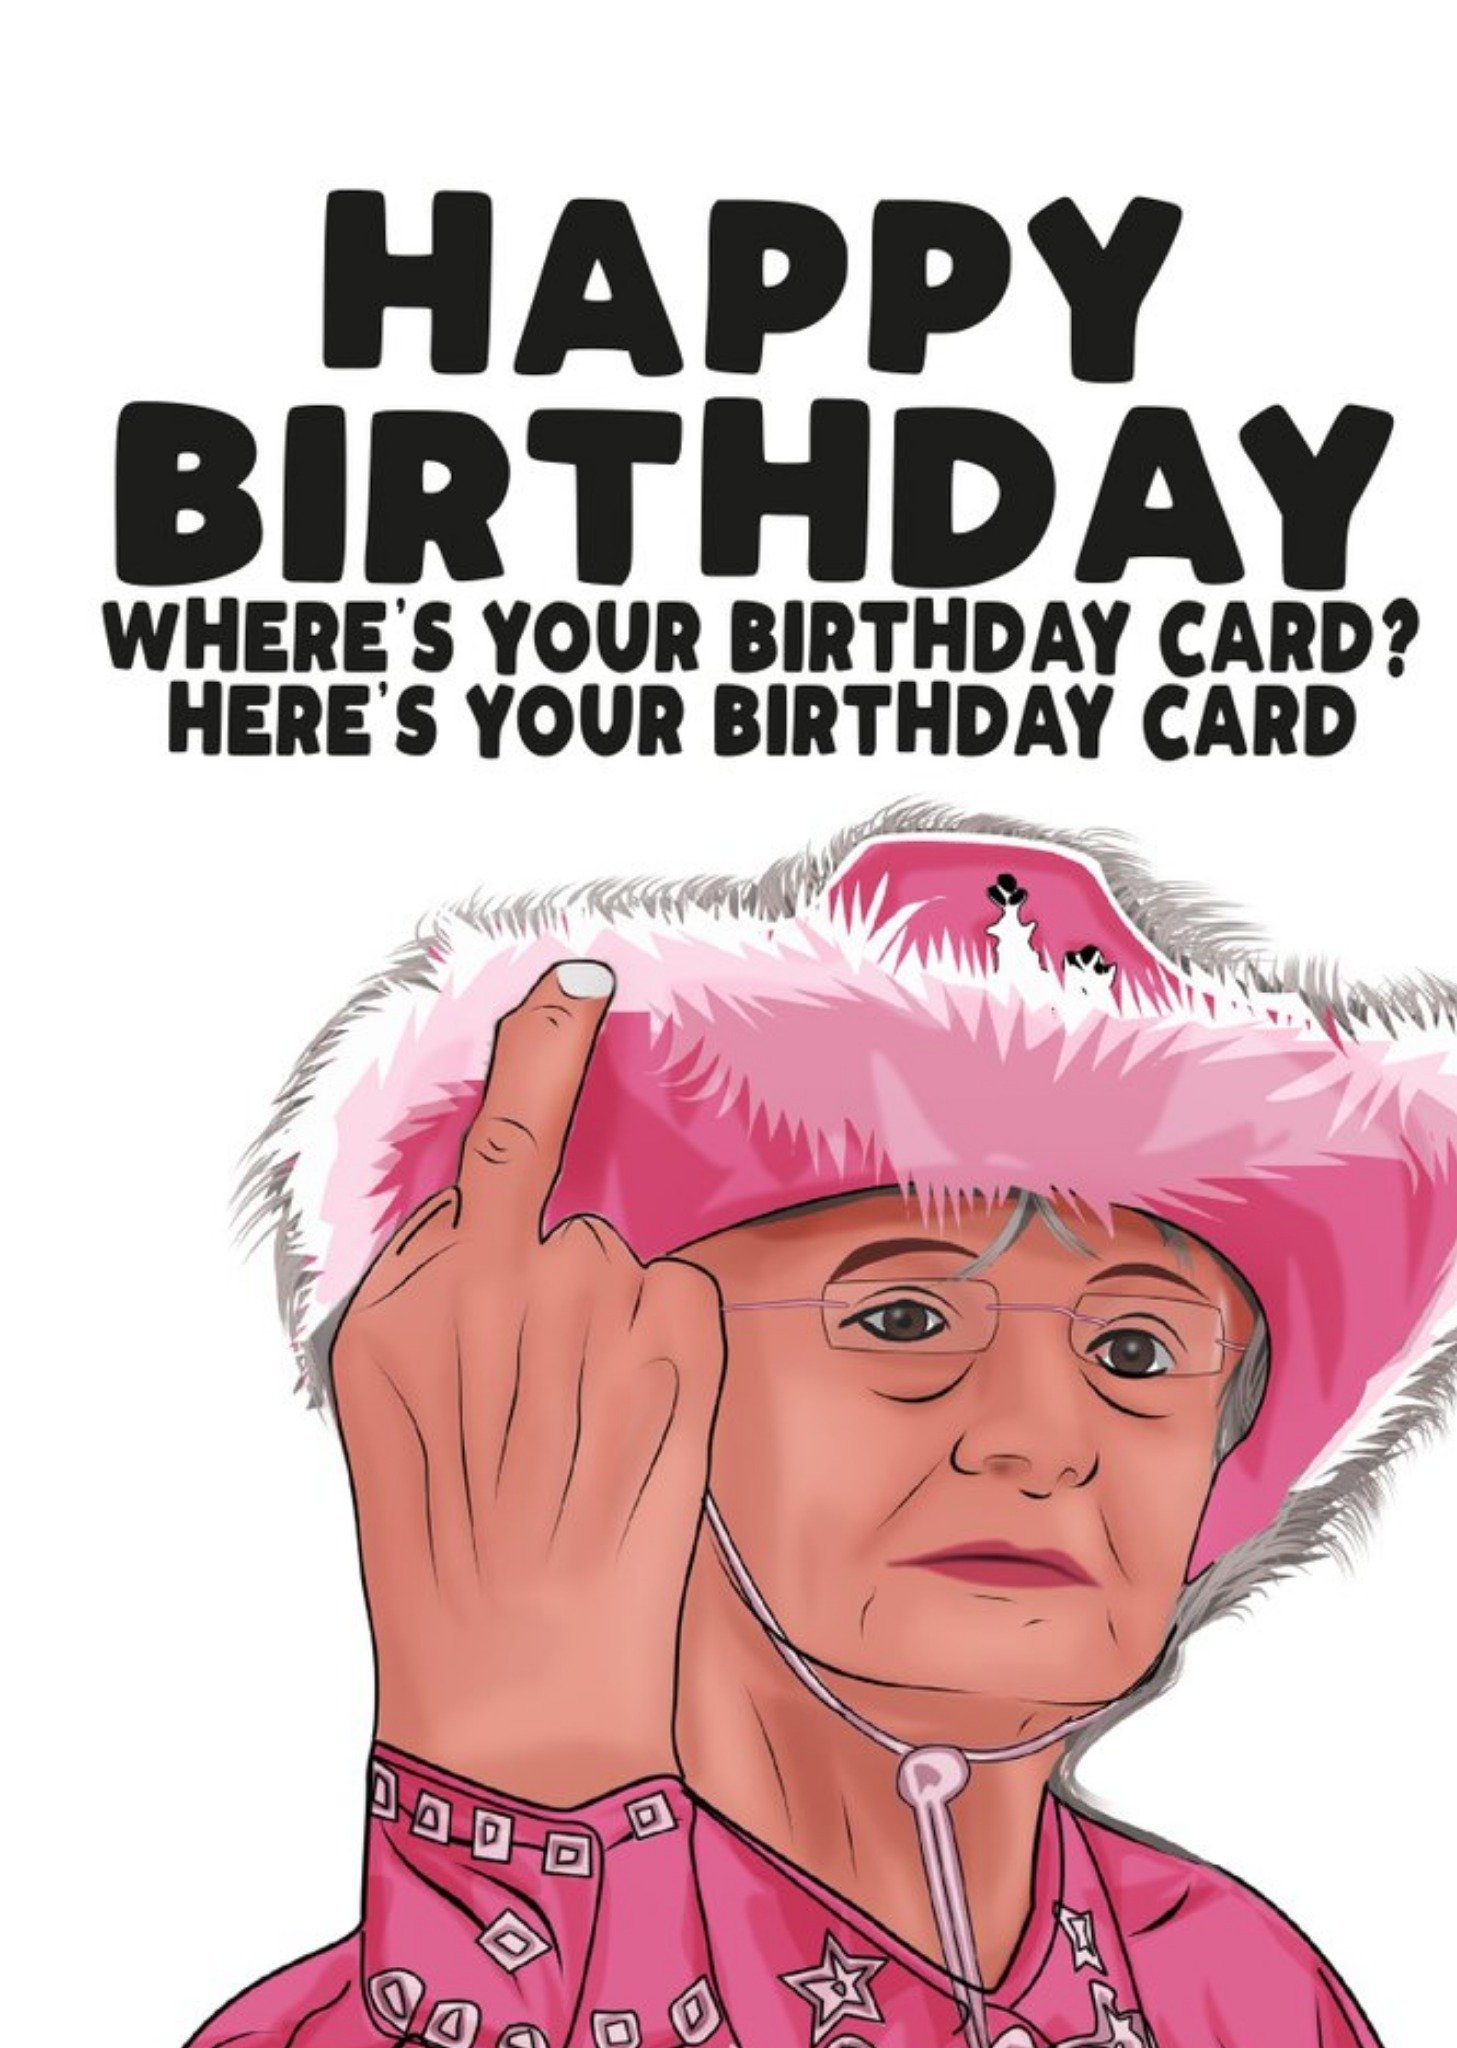 Filthy Sentiments Where Is Your Birthday Card, Here Is Your Birthday Card Happy Birthday Card, Large